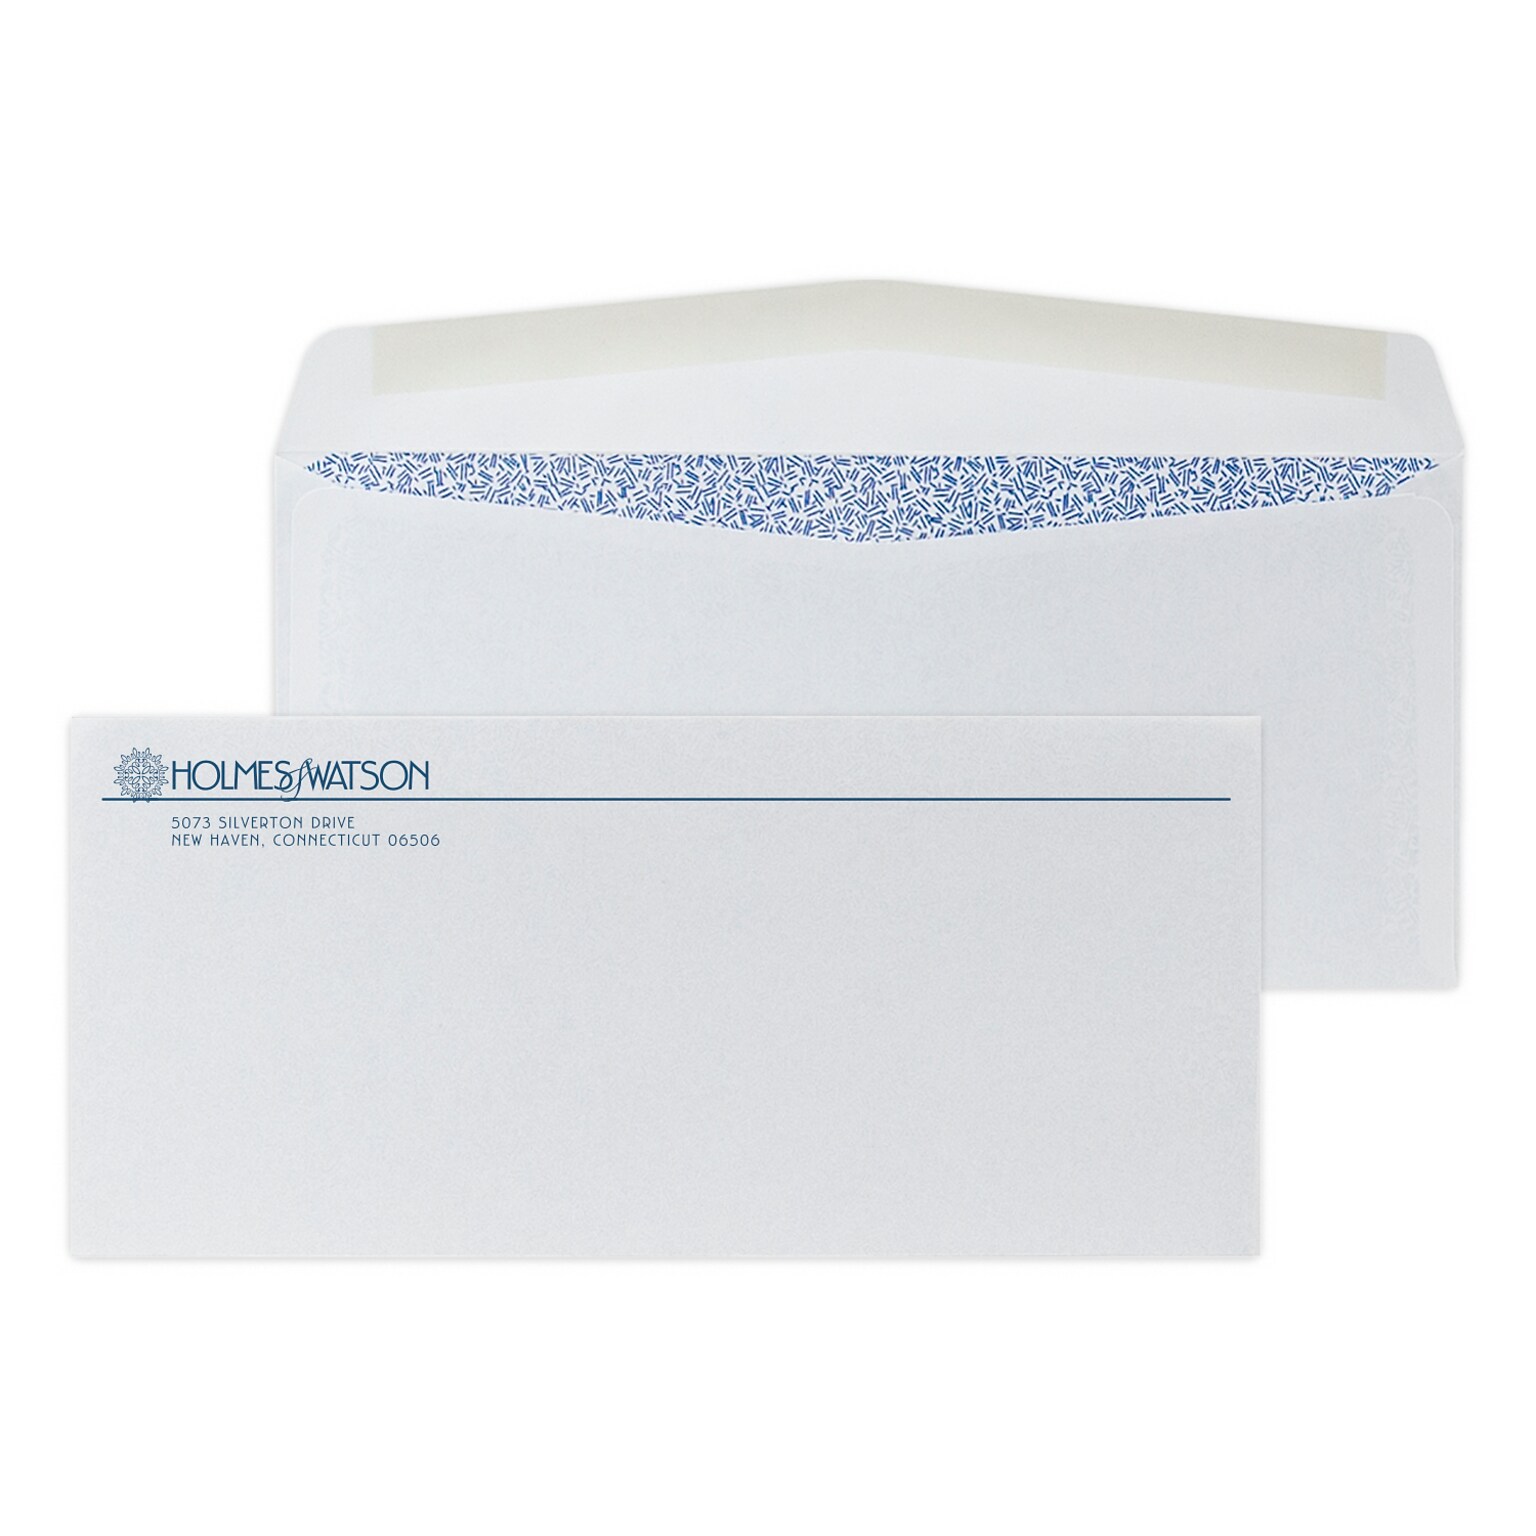 Custom #10 Standard Envelopes with Security Tint, 4 1/4 x 9 1/2, 24# White Wove, 1 Custom Ink, 250 / Pack